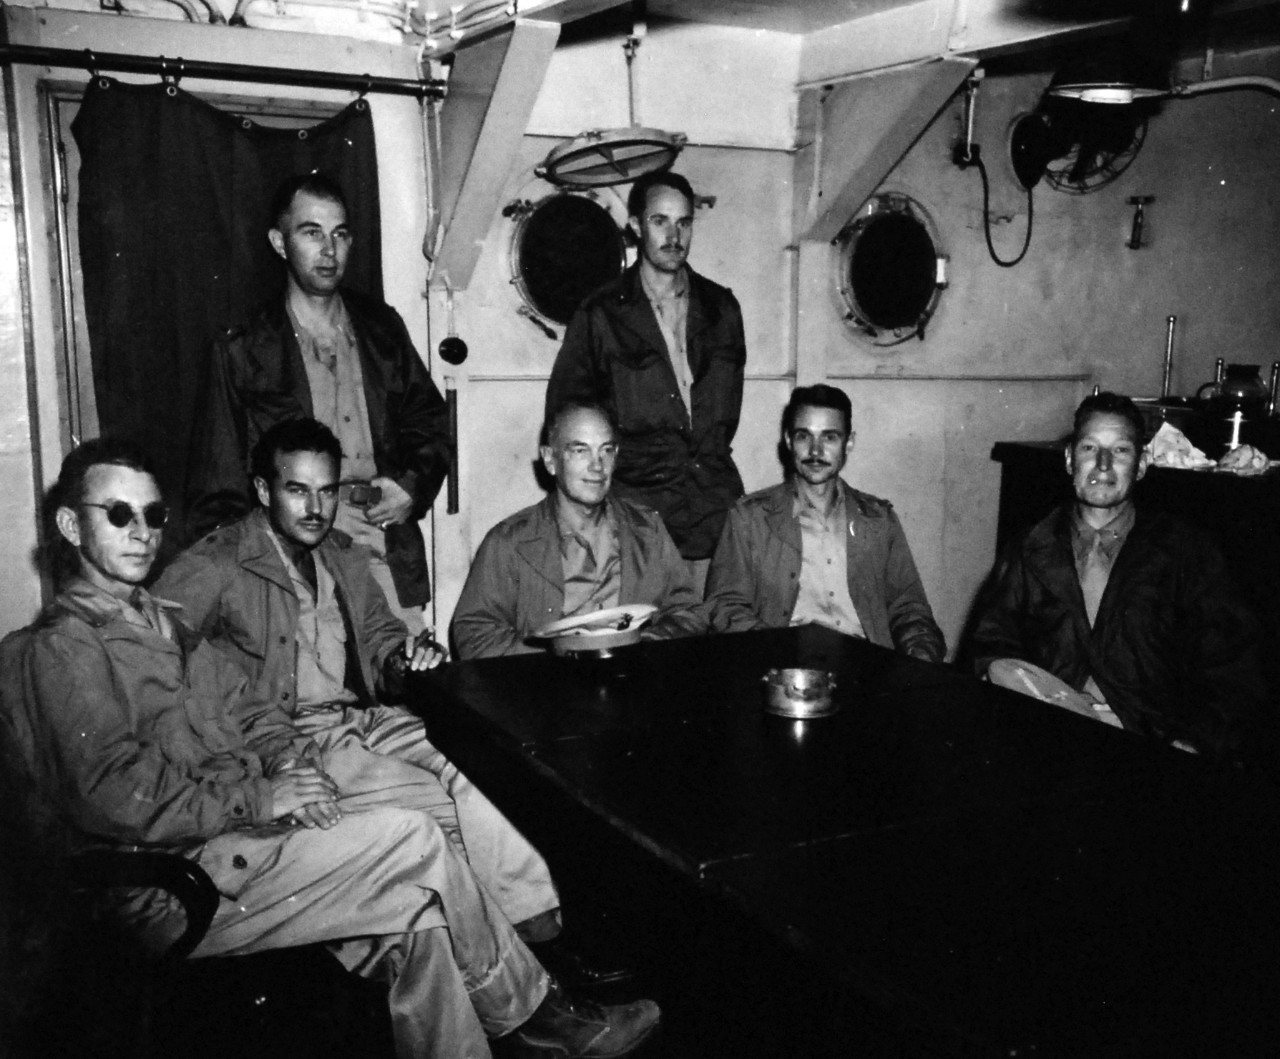 Allied Prisoners of War.  Marine officers who were held as prisoners of war onboard USS Monitor (LSV-5) at Yokohama, Japan.  The shown officers were captured at Peking, China, December 7, 1941.  Left to right:  Captain James F. Climie; Major Luther A. Brown; First Lieutenant Richard D. Weber; Colonel William W. Ashurst; First Lieutenant George R. Newton; Captain James R. Hester; and Chief Marine Gunner William A. Lee.  Photographed by CPHOM D.W. Wingfield and received September 23, 1945. Official U.S. Navy photograph, now in the collections of the National Archives.   (2015/11/24).